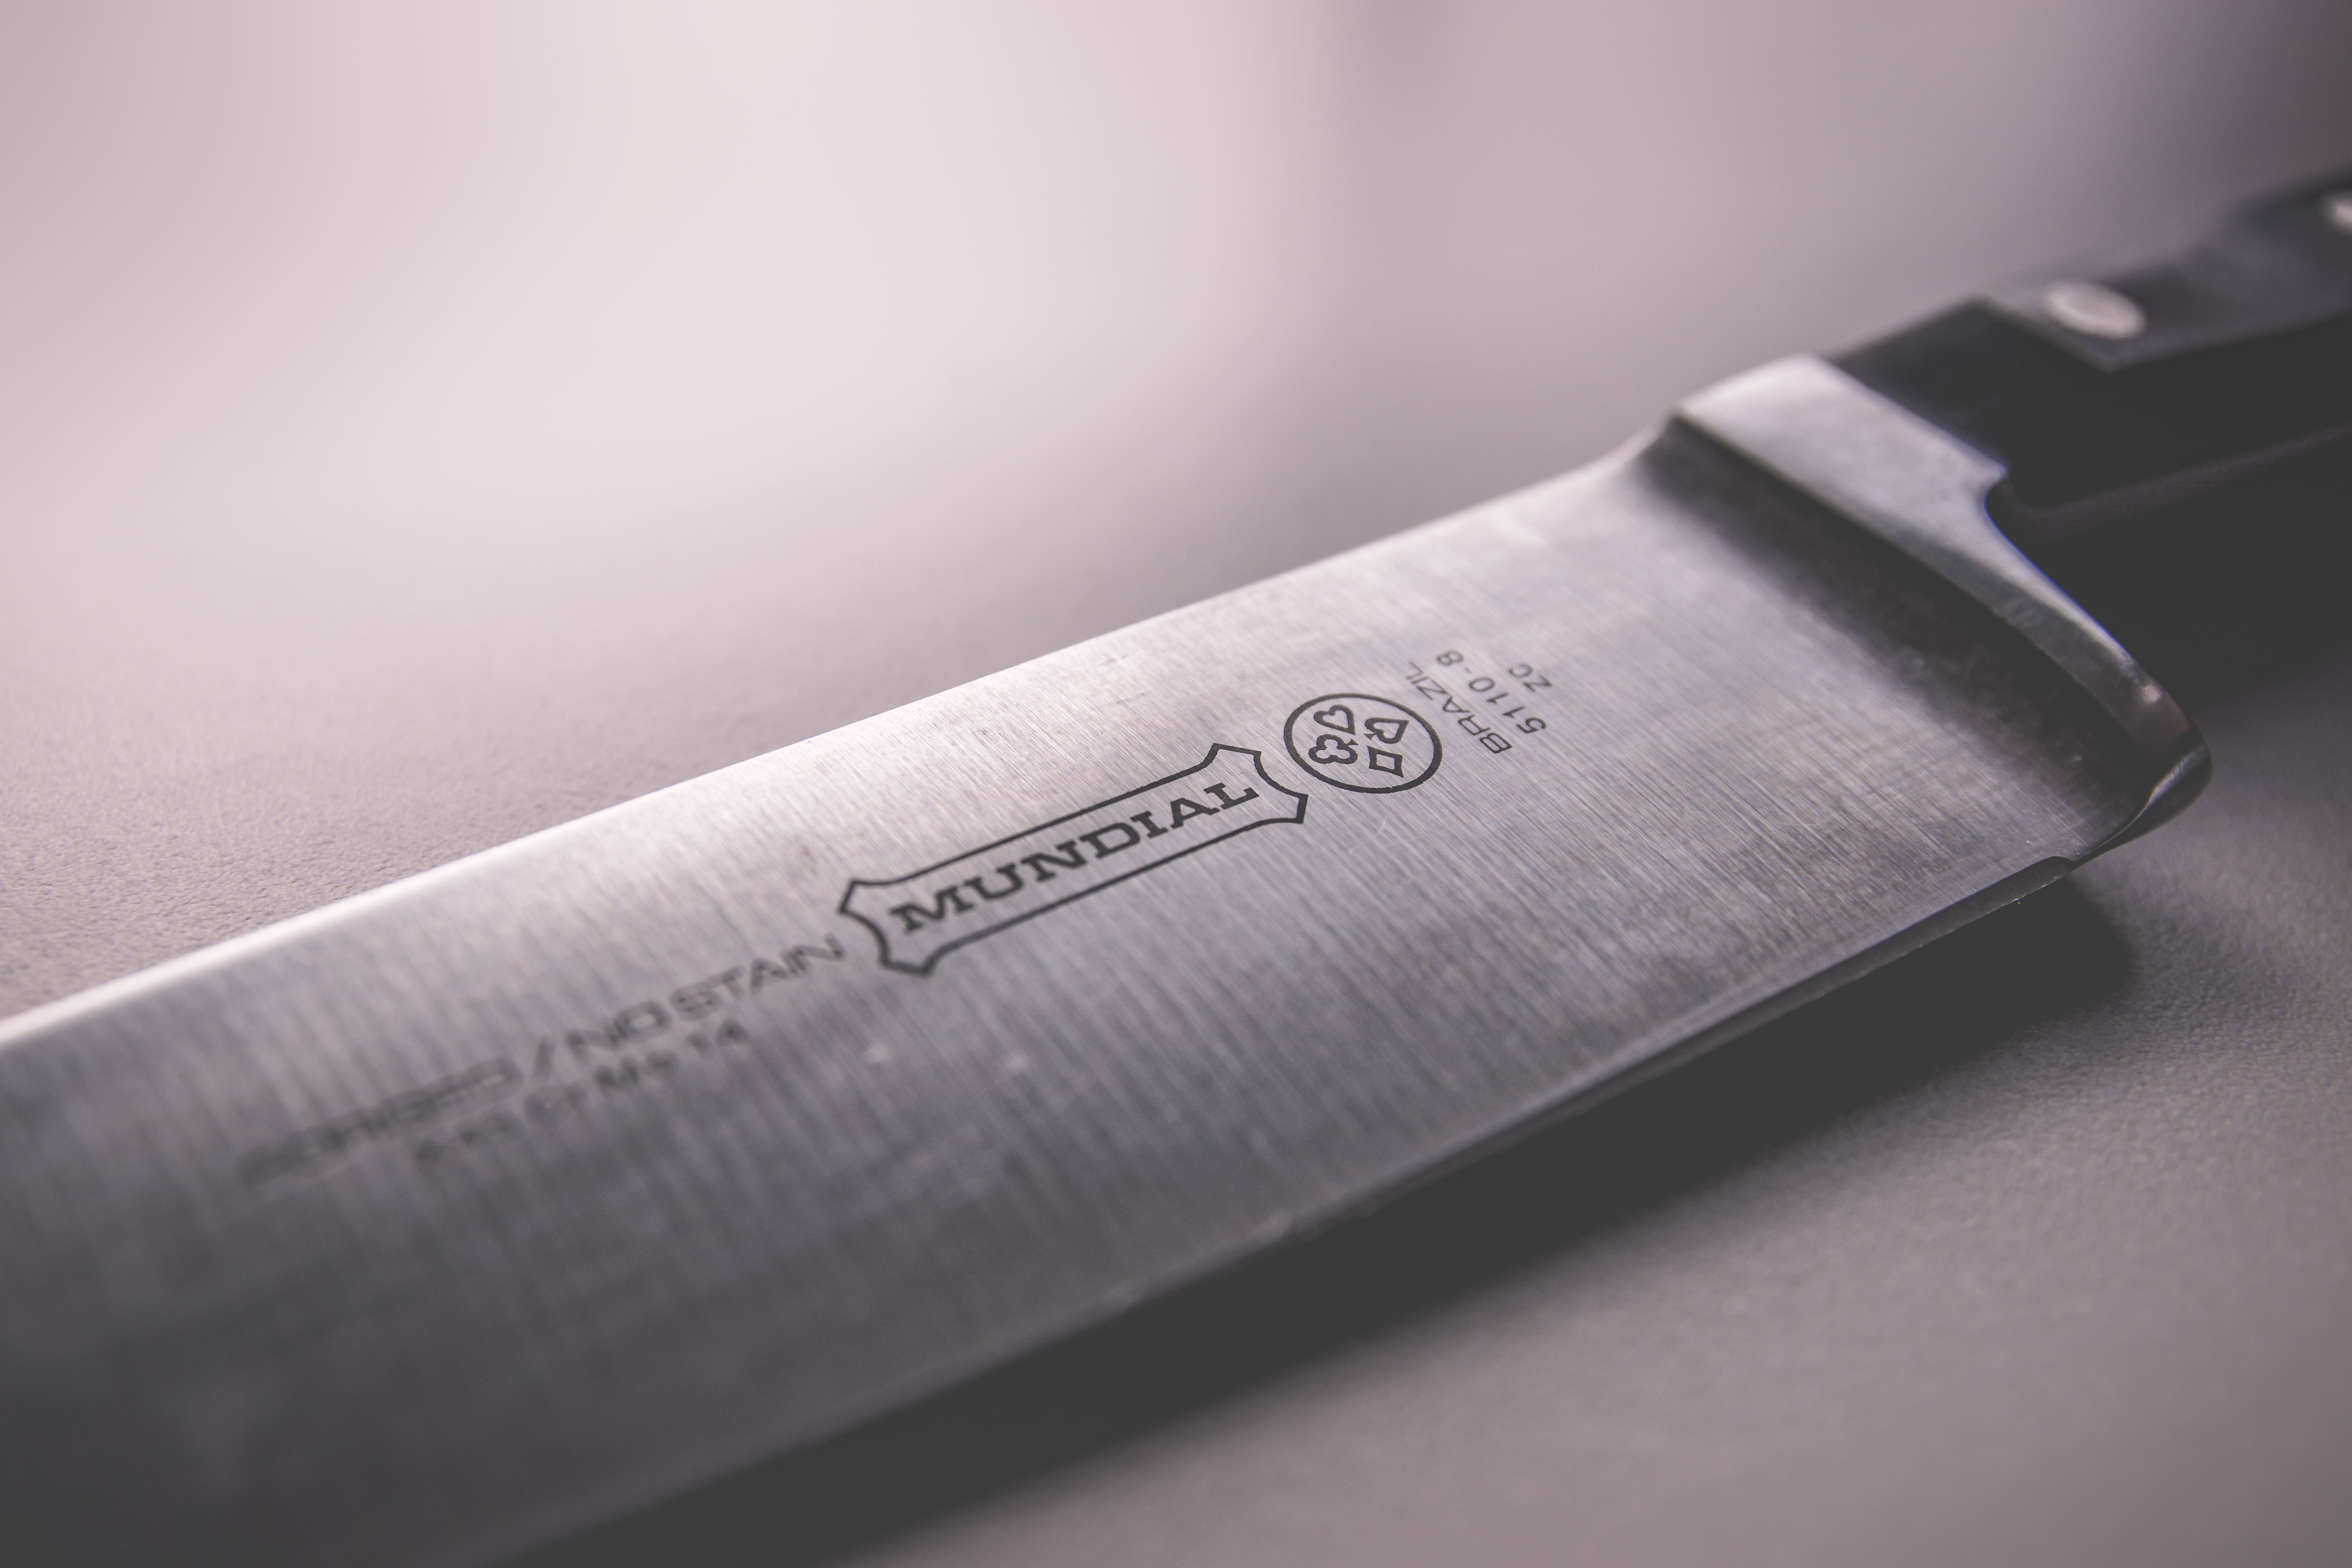 Wallpaper, black, steel, metal, Nikon, lines, sharp, Tool, Mono, depthoffield, bw, dof, hand, iron, curve, sigma, d nikond curves, blade, product, monochroom, melee weapon, knive, stainless, kitchen knife 5532x3688